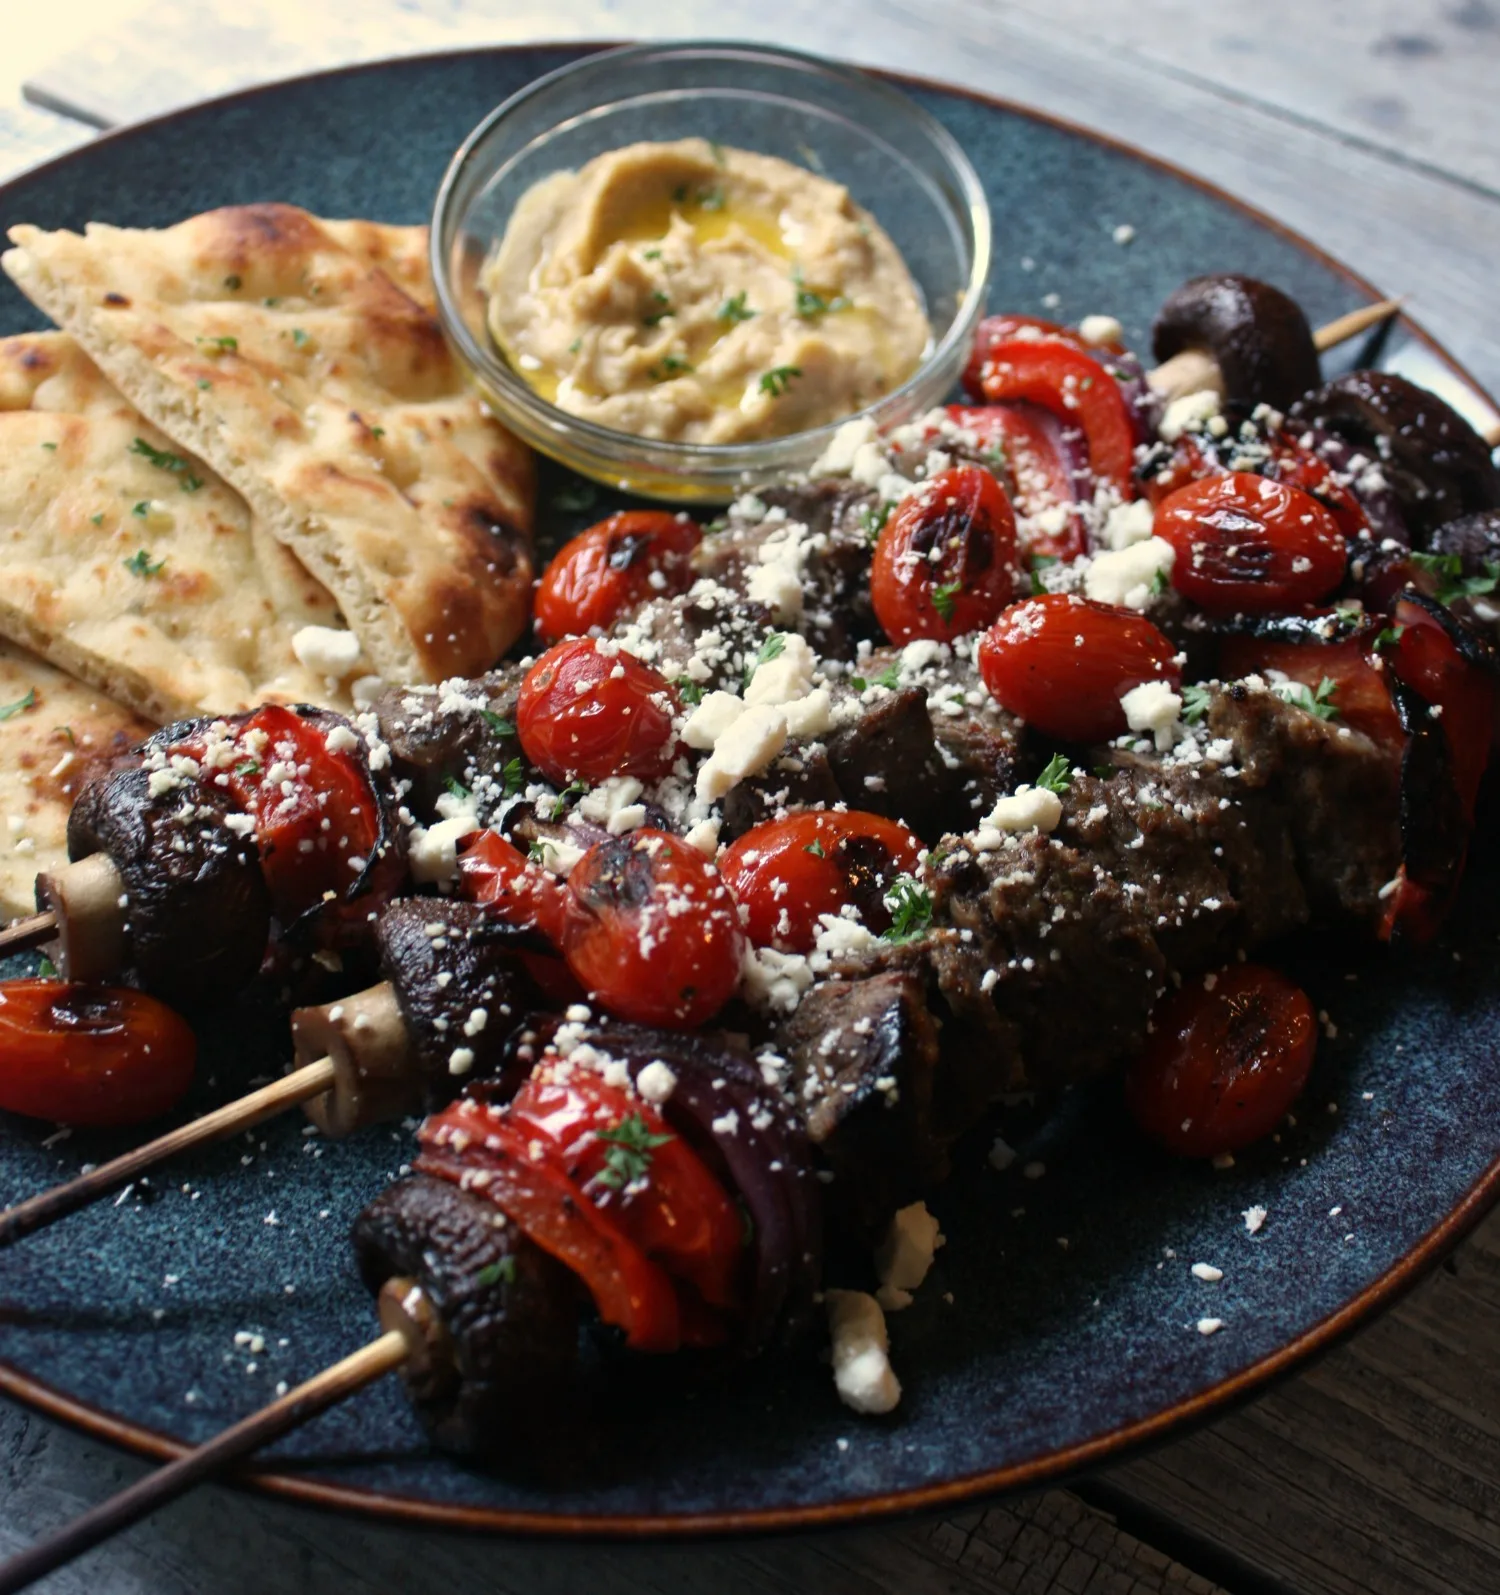 Beef Kabobs with Blistered Tomatoes and Feta Cheese. Served with grilled naan bread and a side of hummus. 